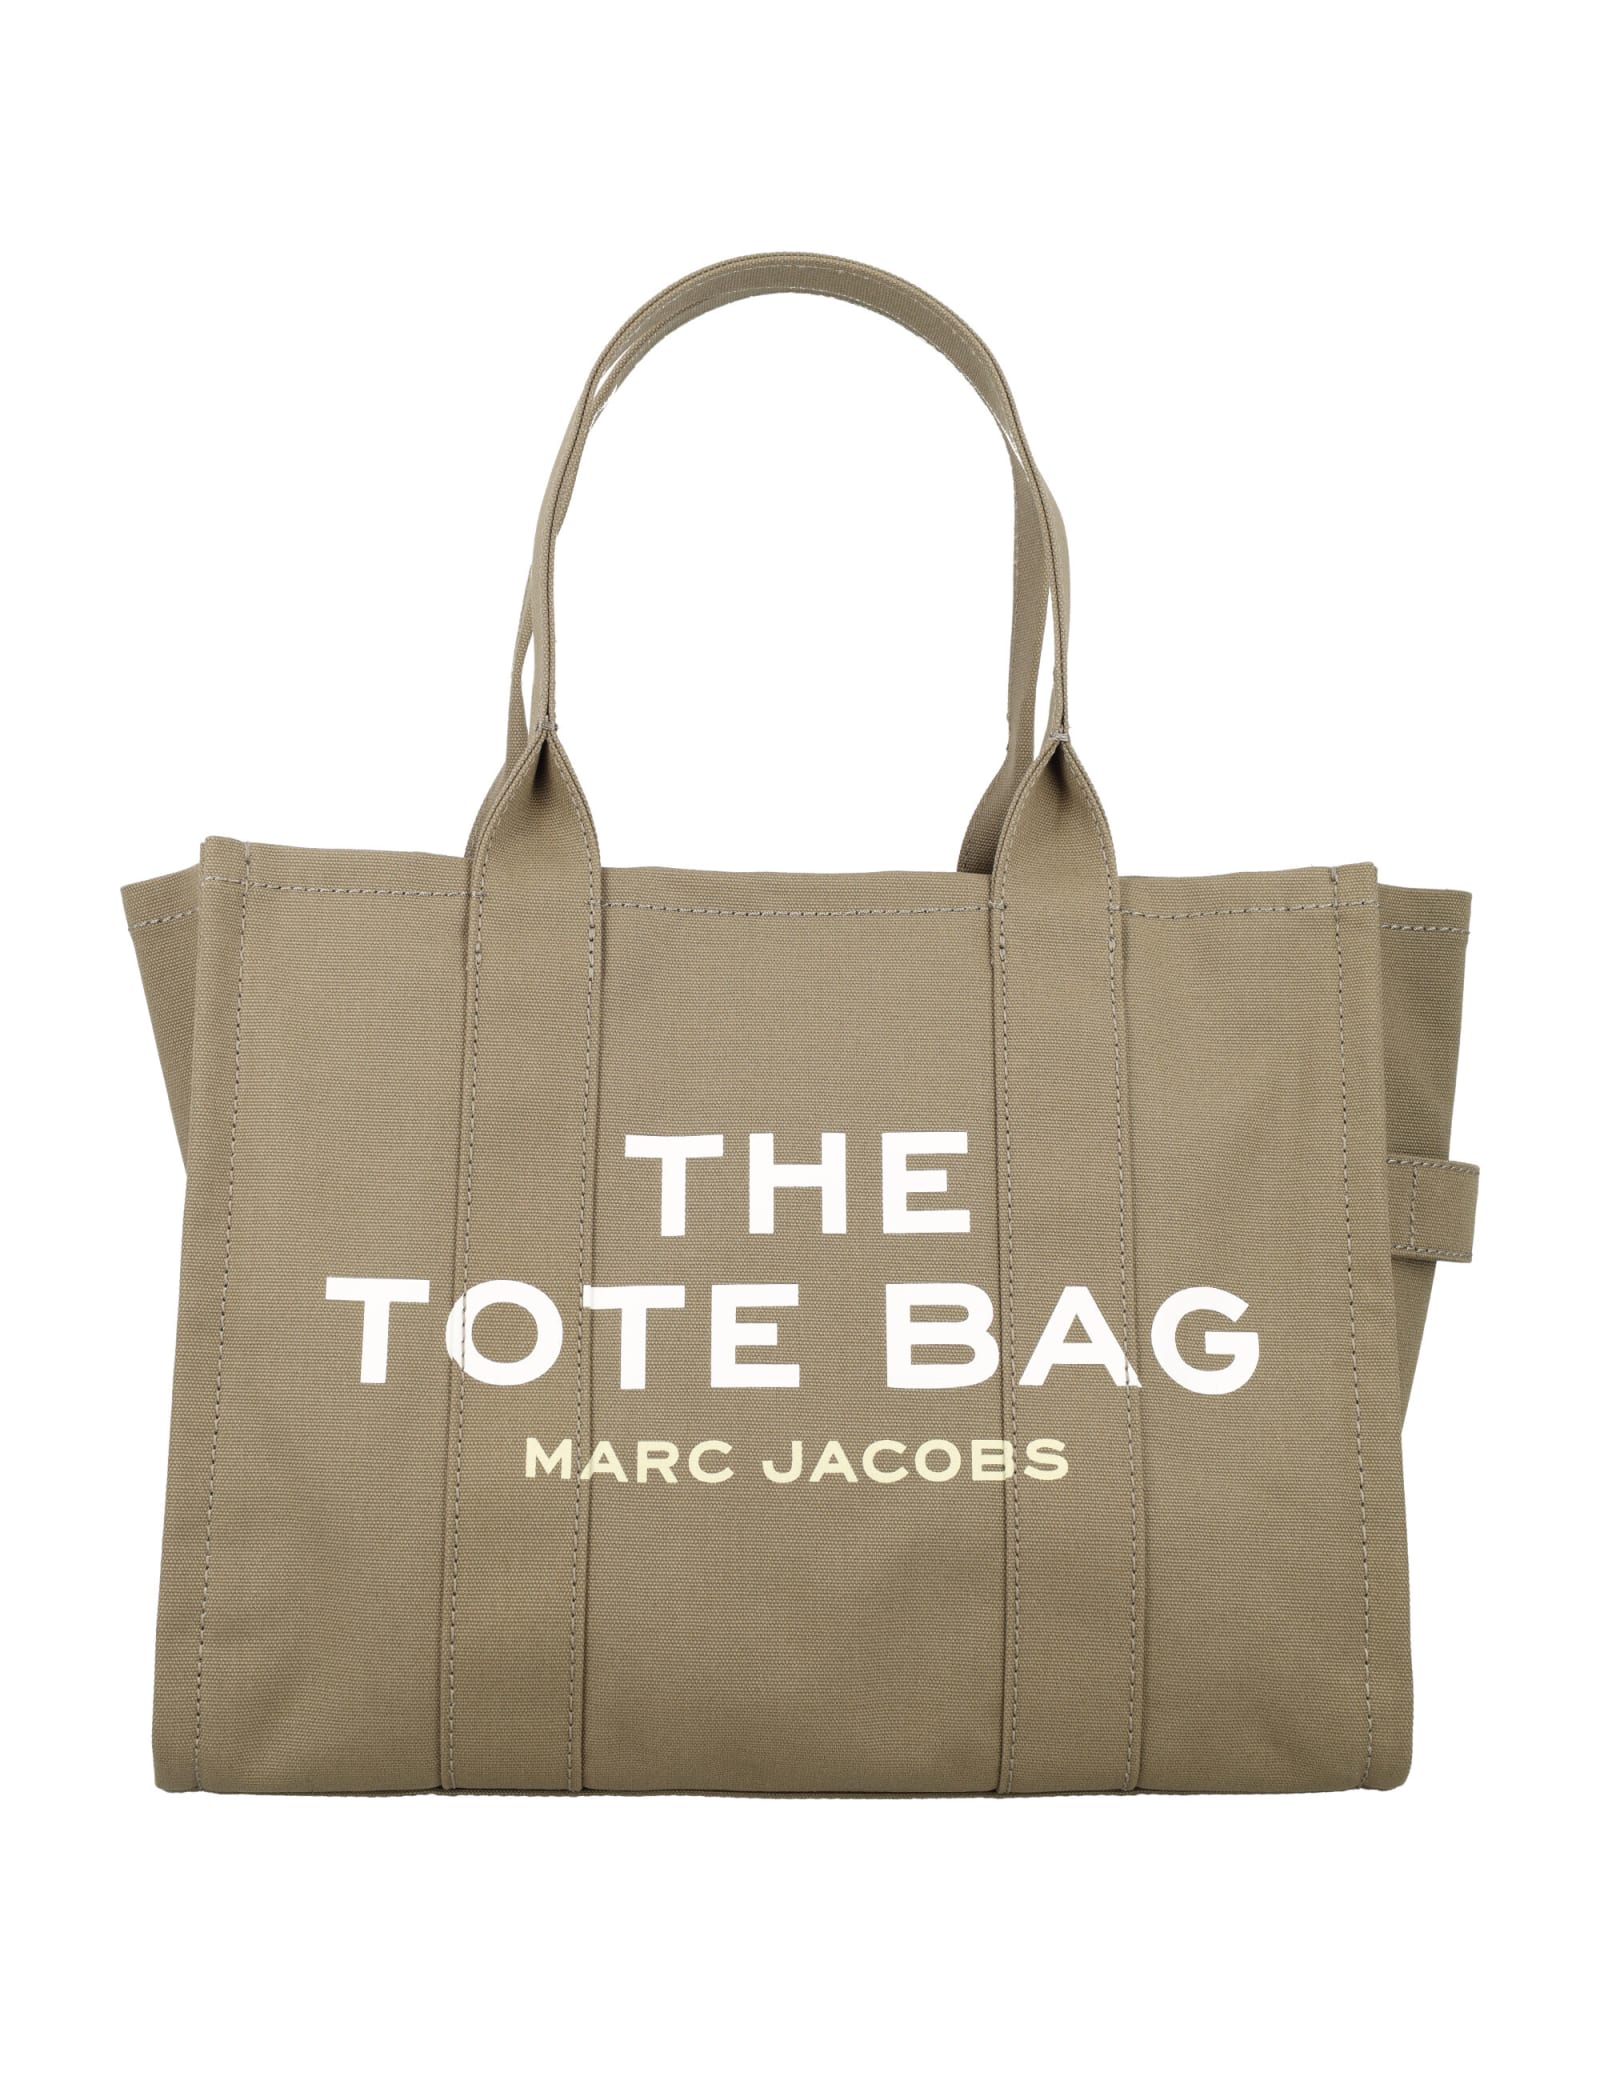 MARC JACOBS THE LARGE TOTE BAG